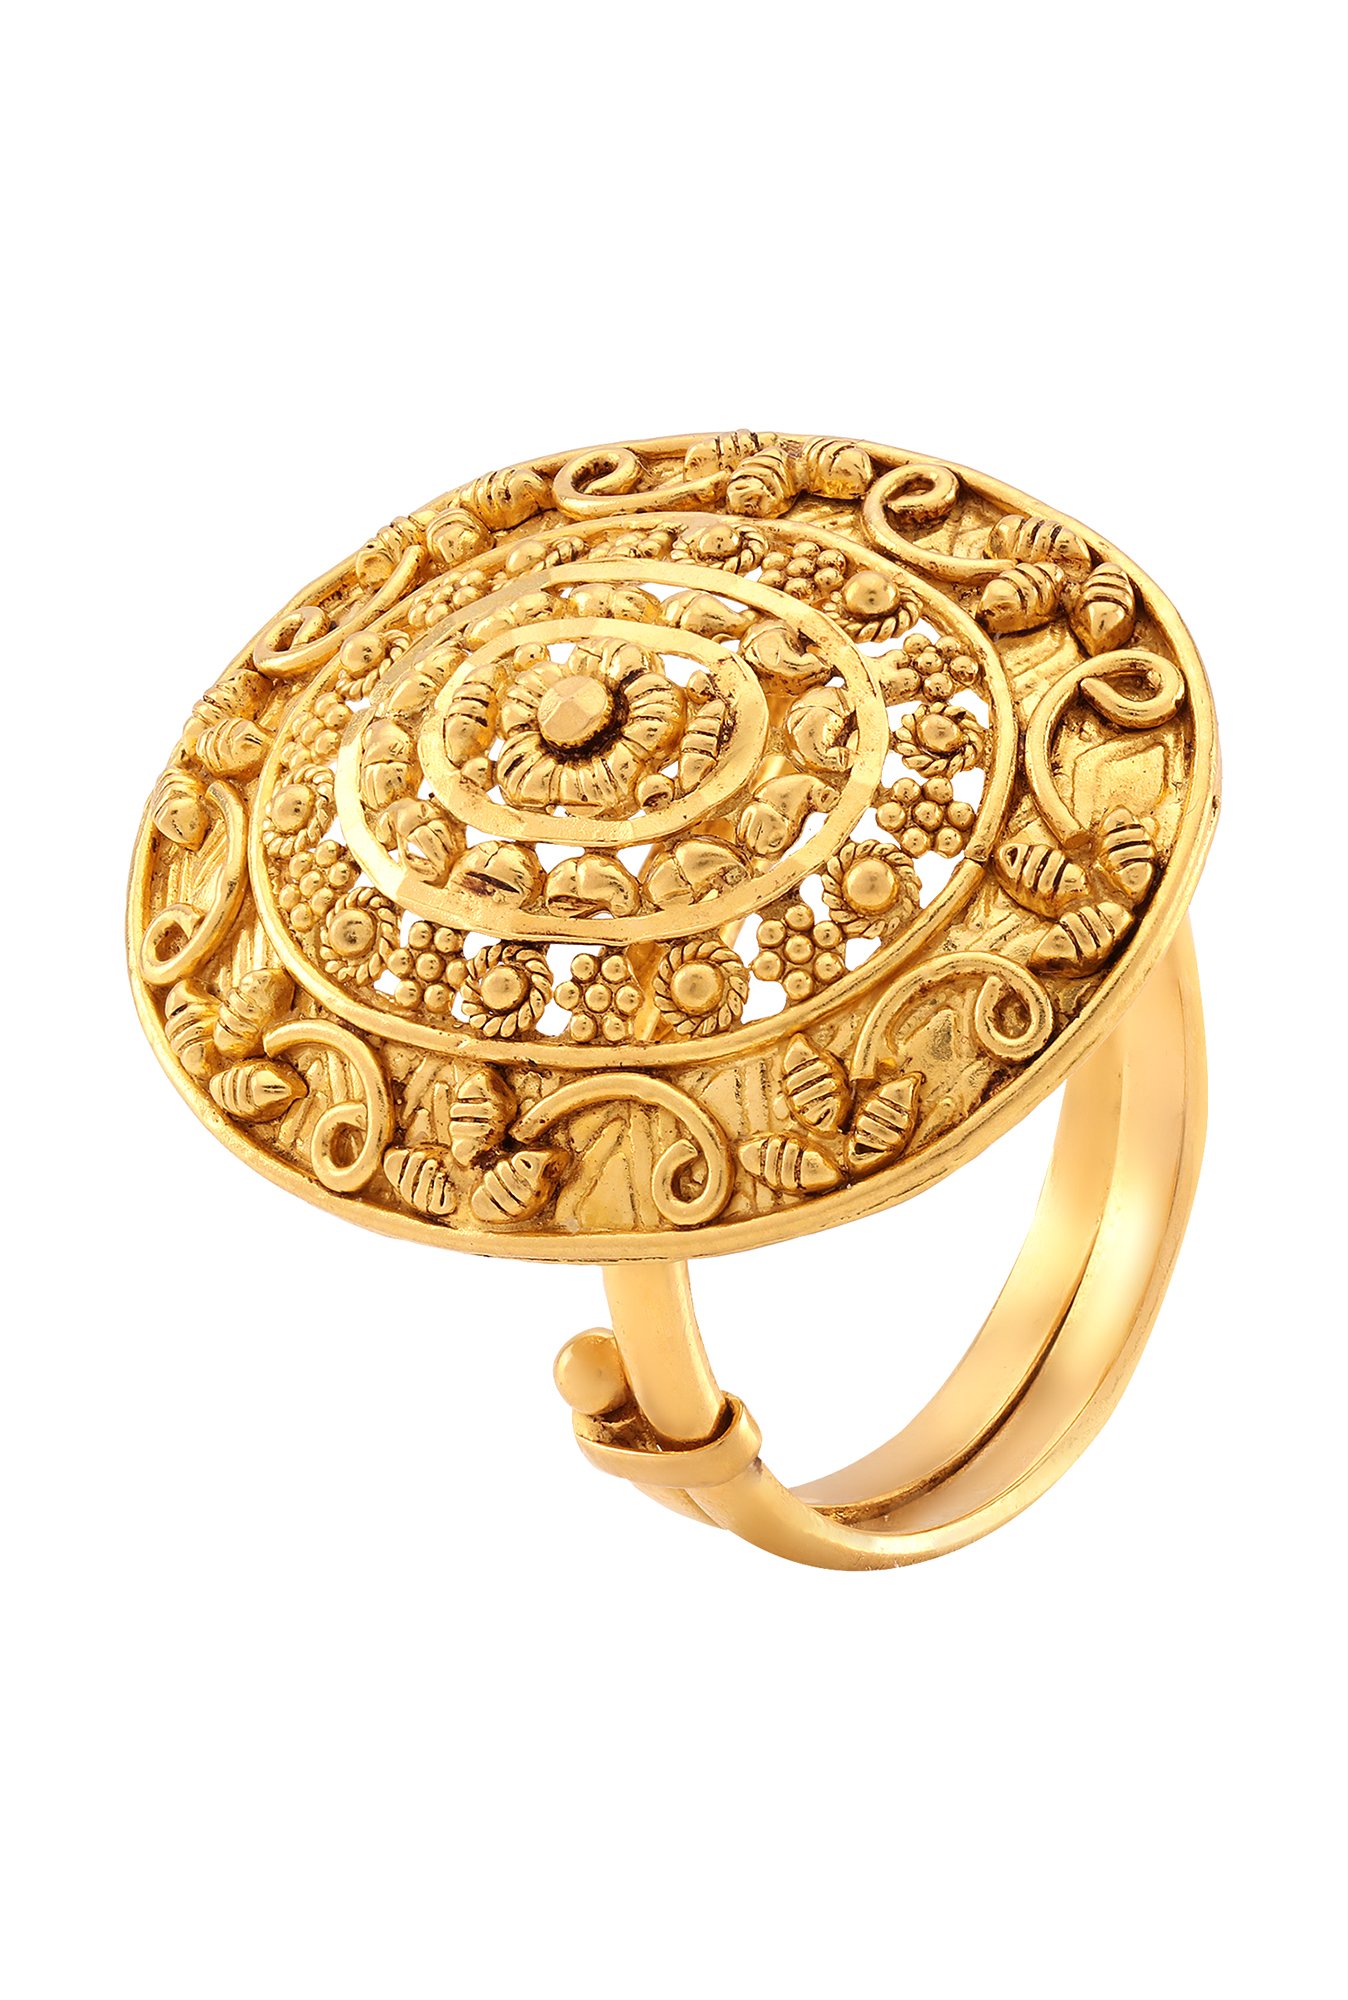 GOLD JODHA RING DESIGN WITH WEIGHT AND PRICE ||Big ring design ||Party Wear  Ring Designs - YouTube | Gold ring designs, Ring designs, Latest gold ring  designs